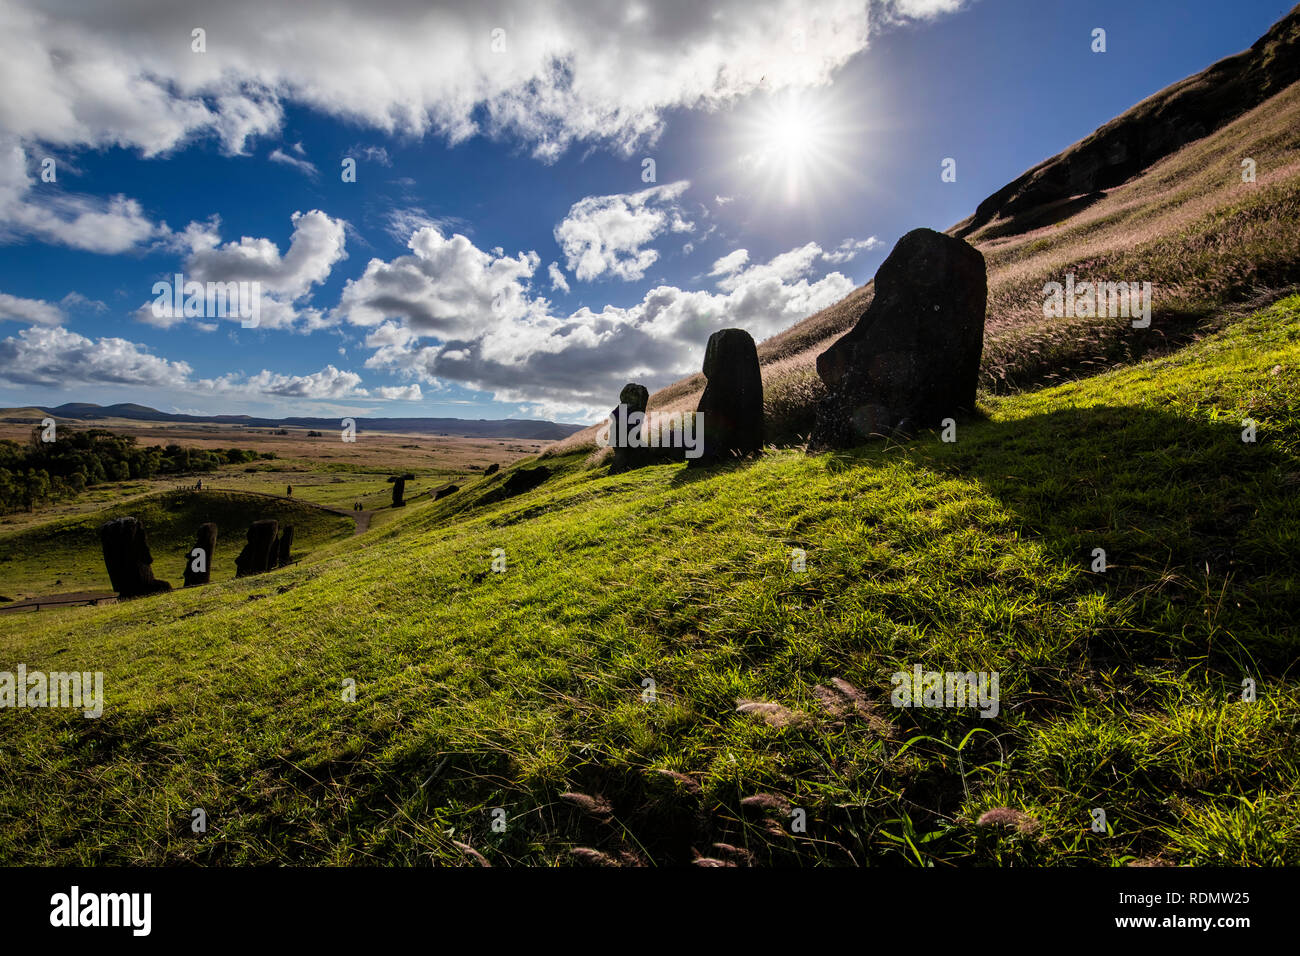 Rano Raraku Volcano, the Moais quarry where all were built on the past. Moais statues still are standing over the ground grass on an awe scenery Stock Photo